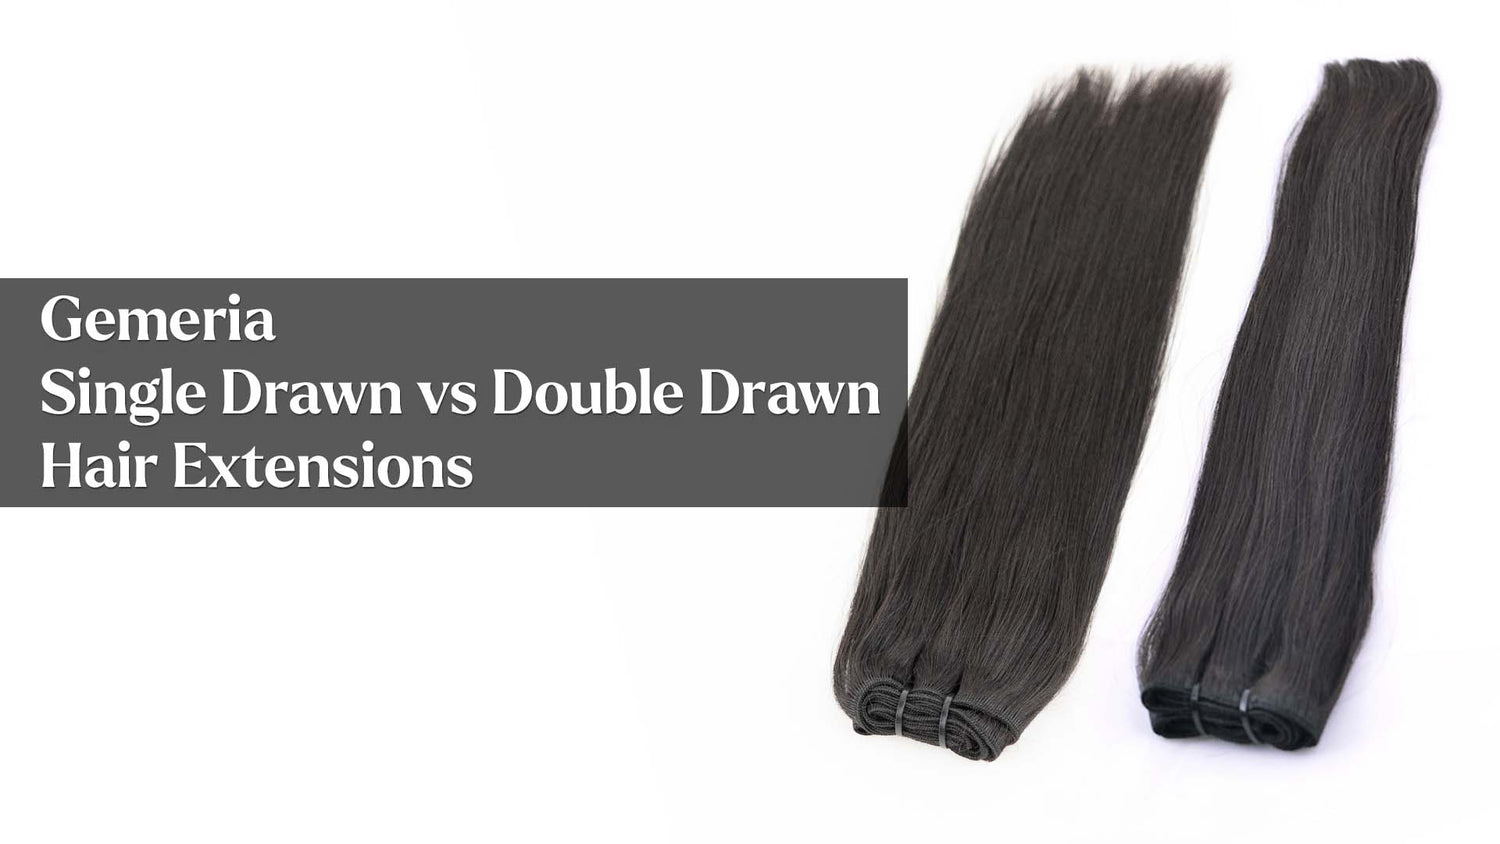 single drawn hair extensions vs double drawn hair extensions